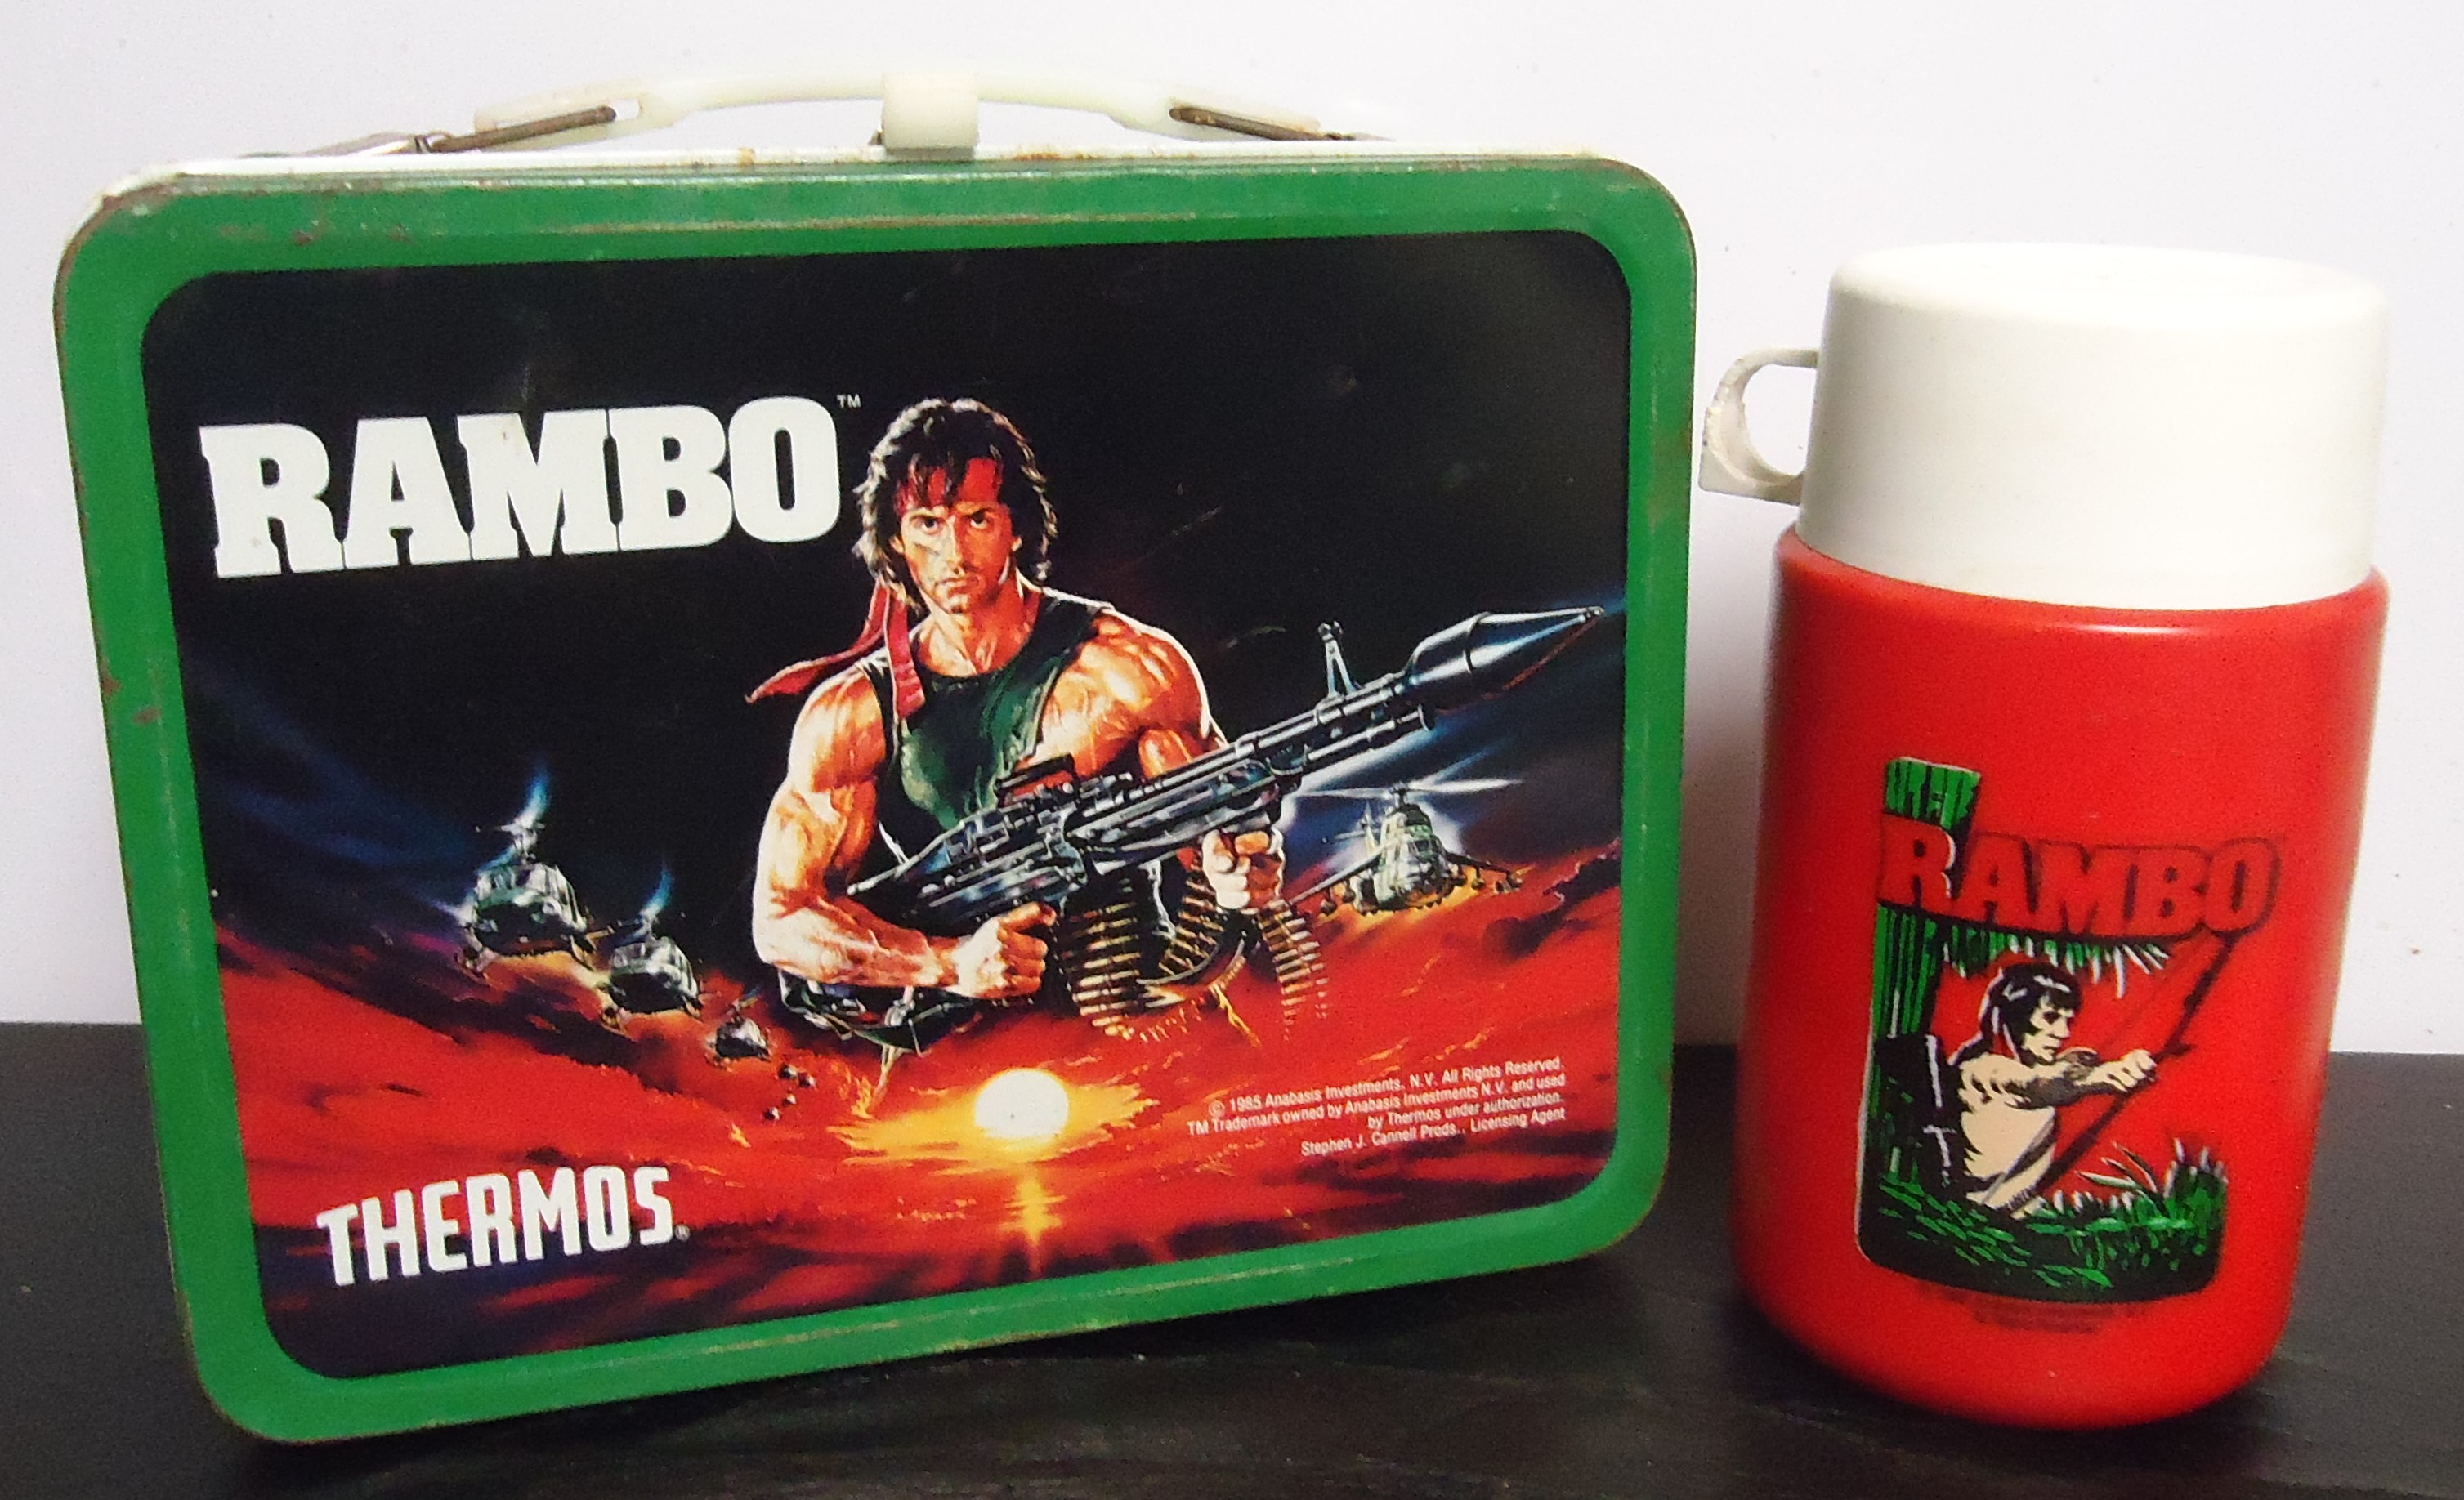 (5) "Rambo" Metal Lunch Box
W/ Thermos
$55.00